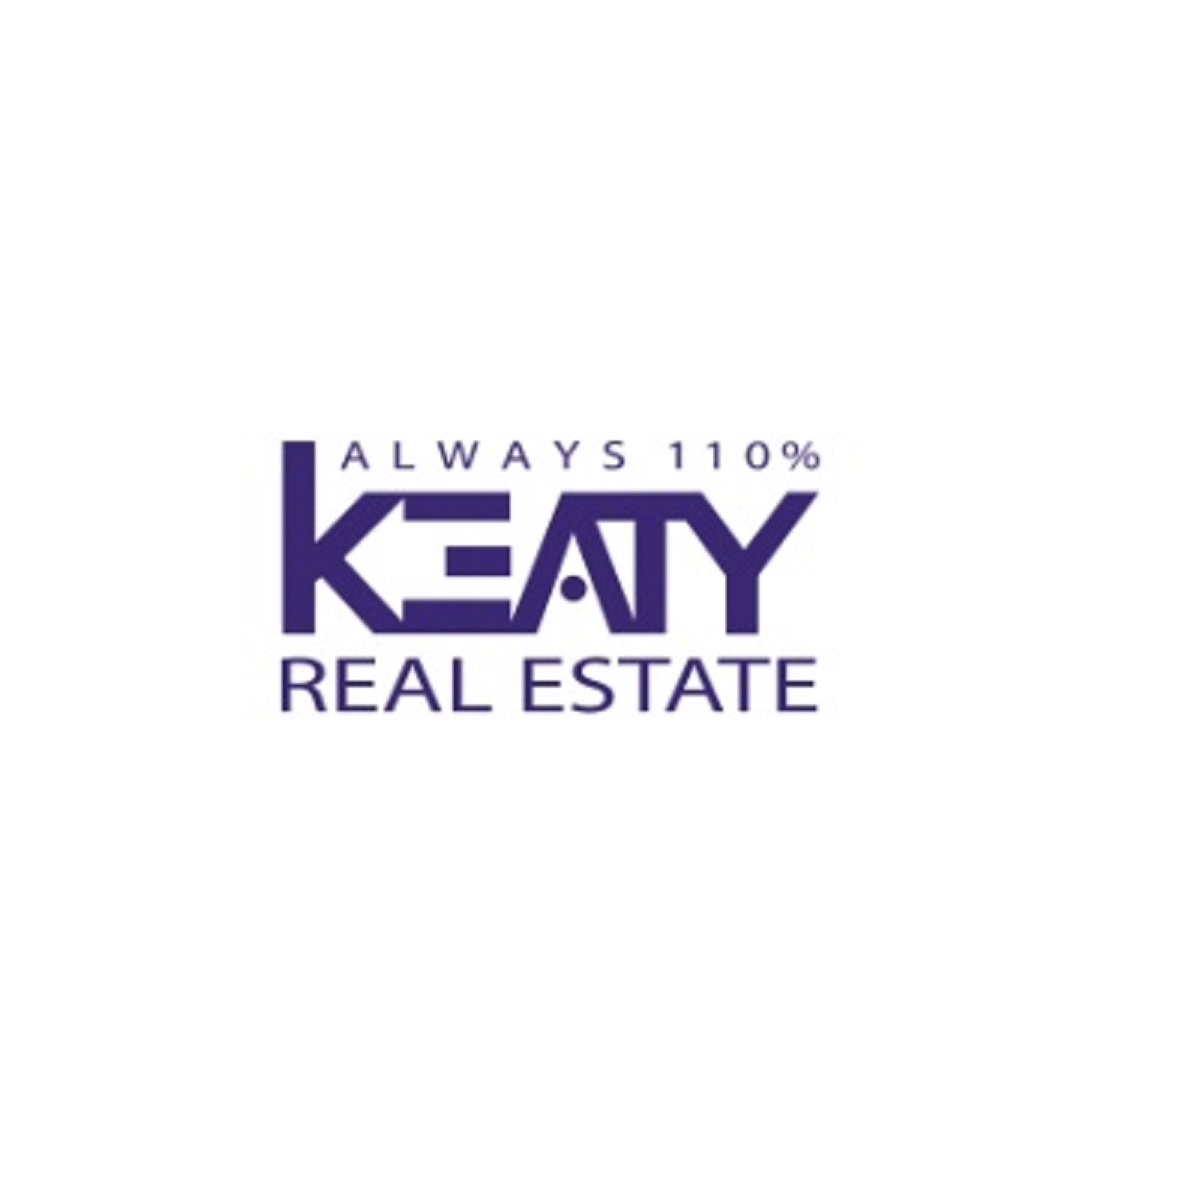 Keaty Real Estate Northshore Cover Image